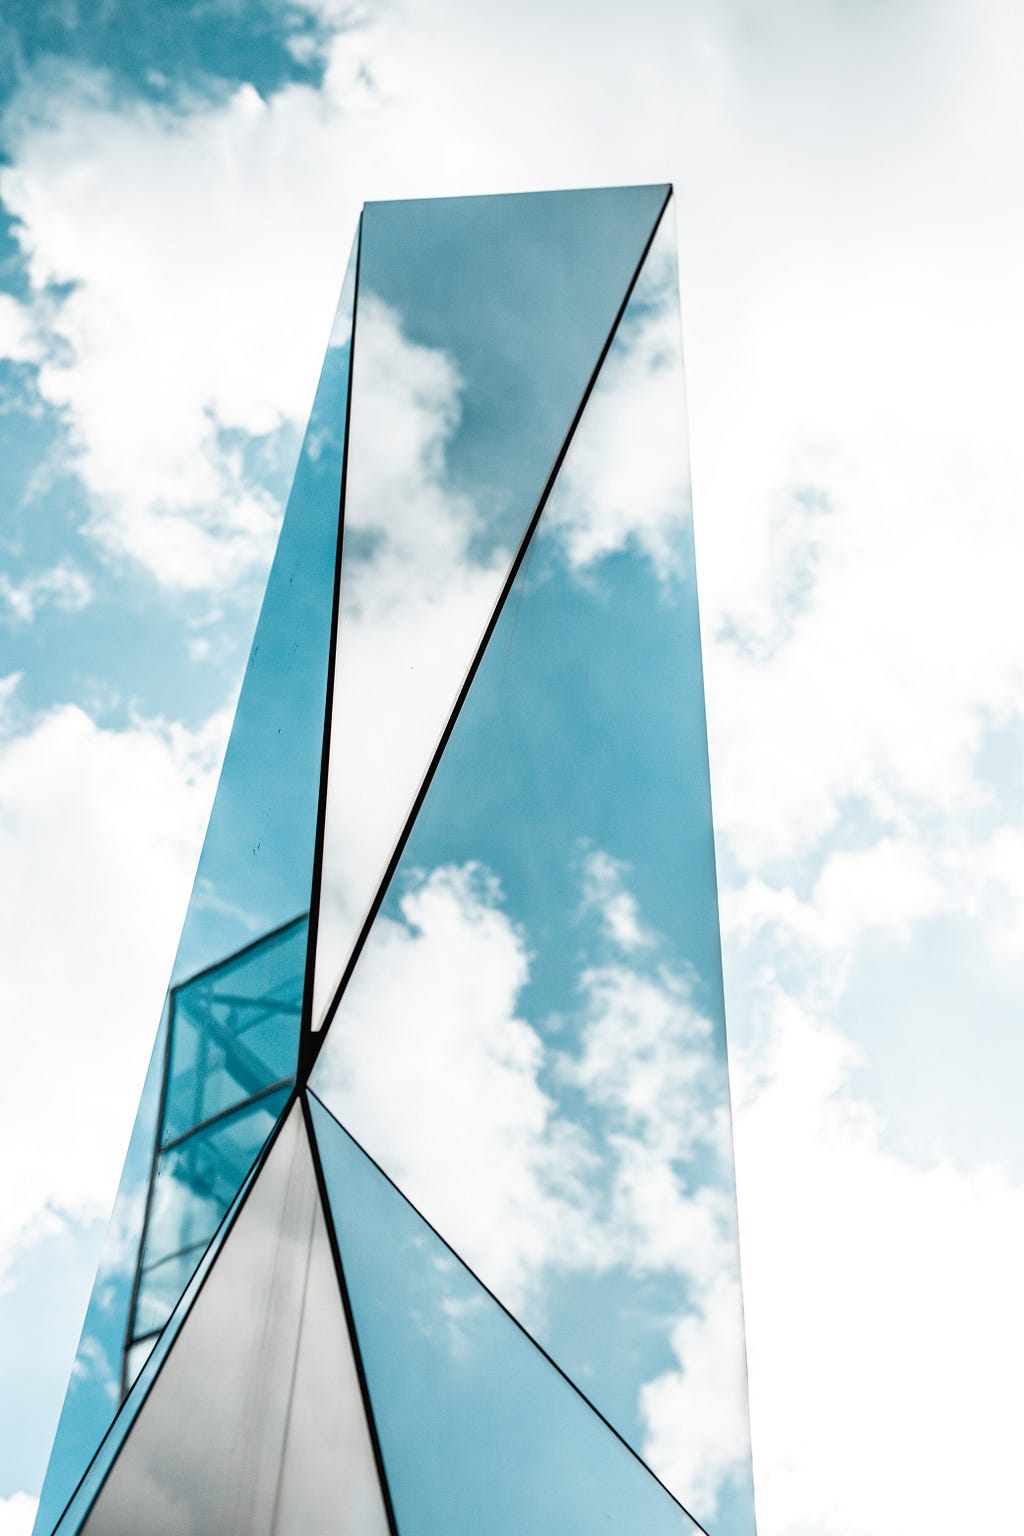 Sculpture made of mirrors reflecting a blue, cloudy sky